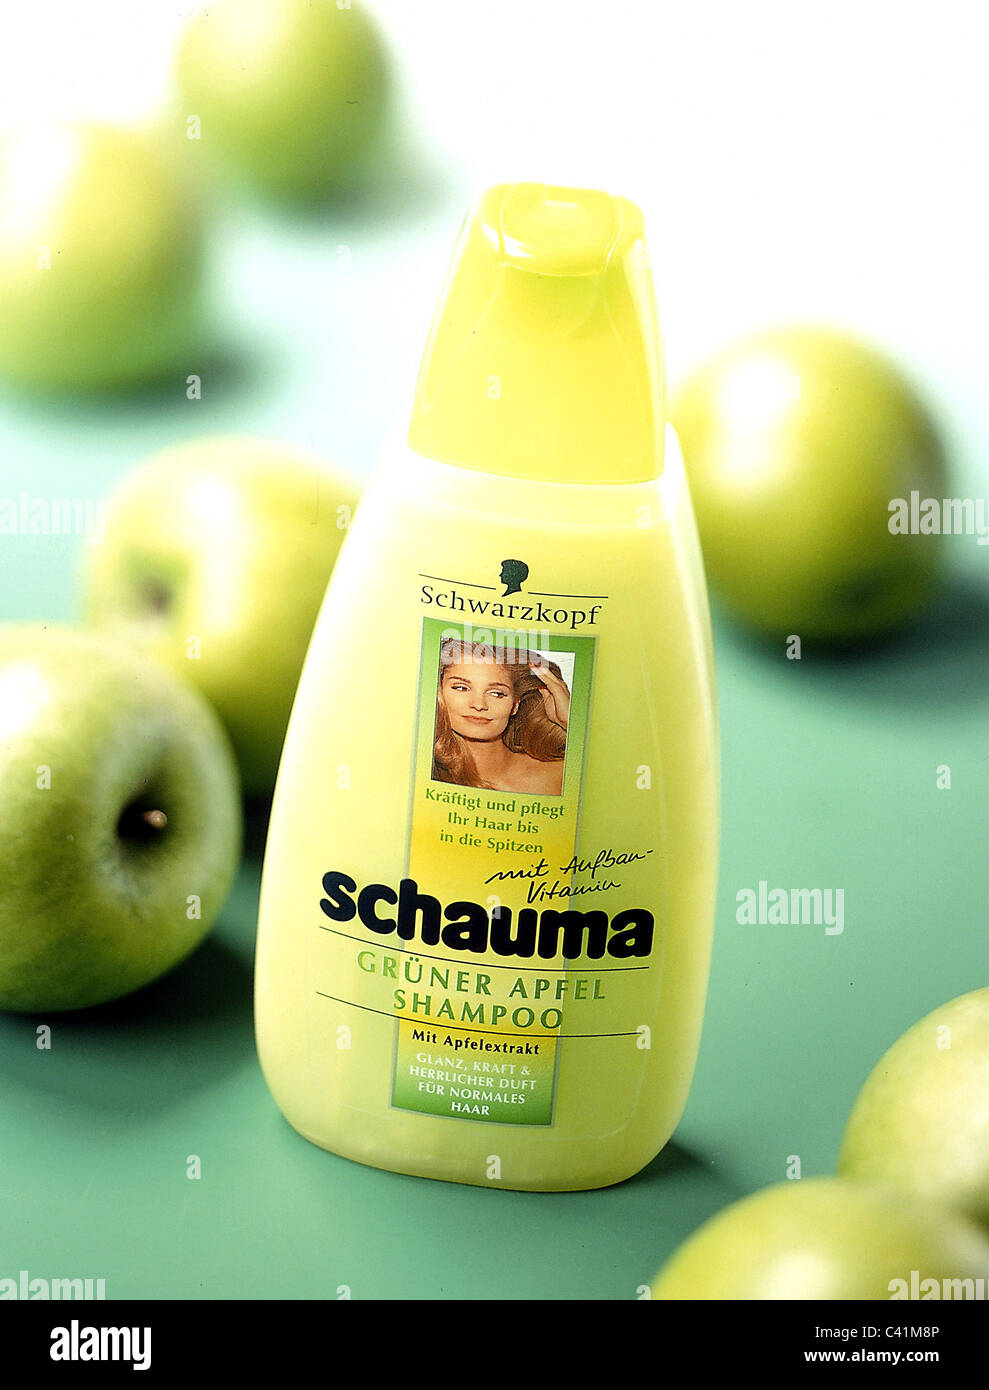 Schwarzkopf Shampoo High Resolution Stock Photography and Images - Alamy